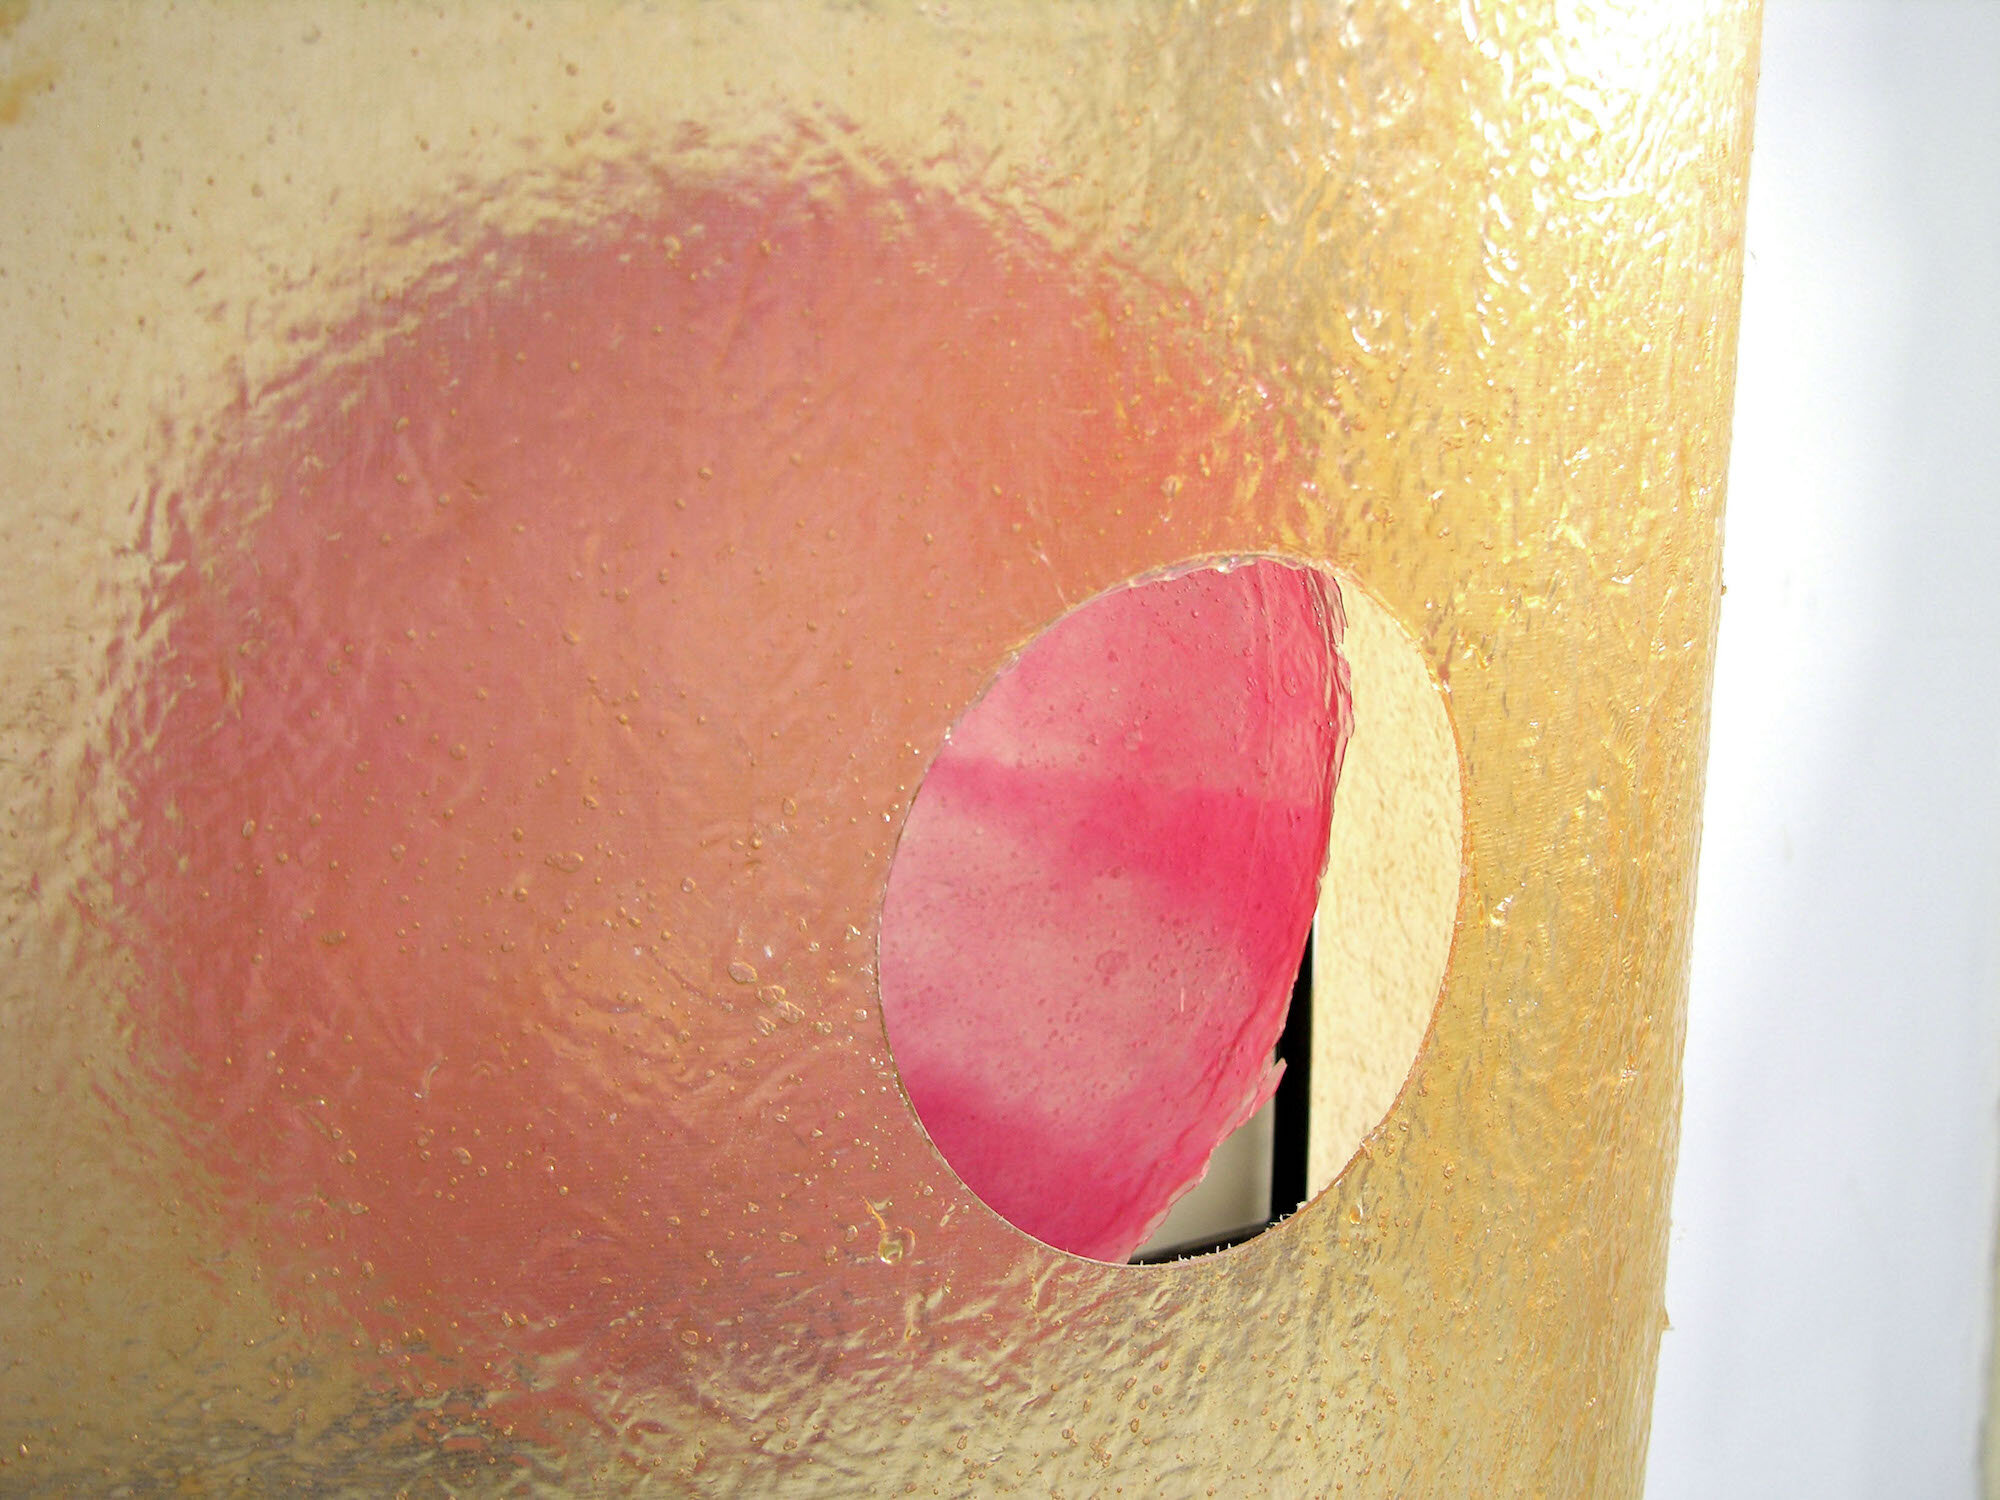  detail, Belly (2007), polyester resin, pigment, steel 